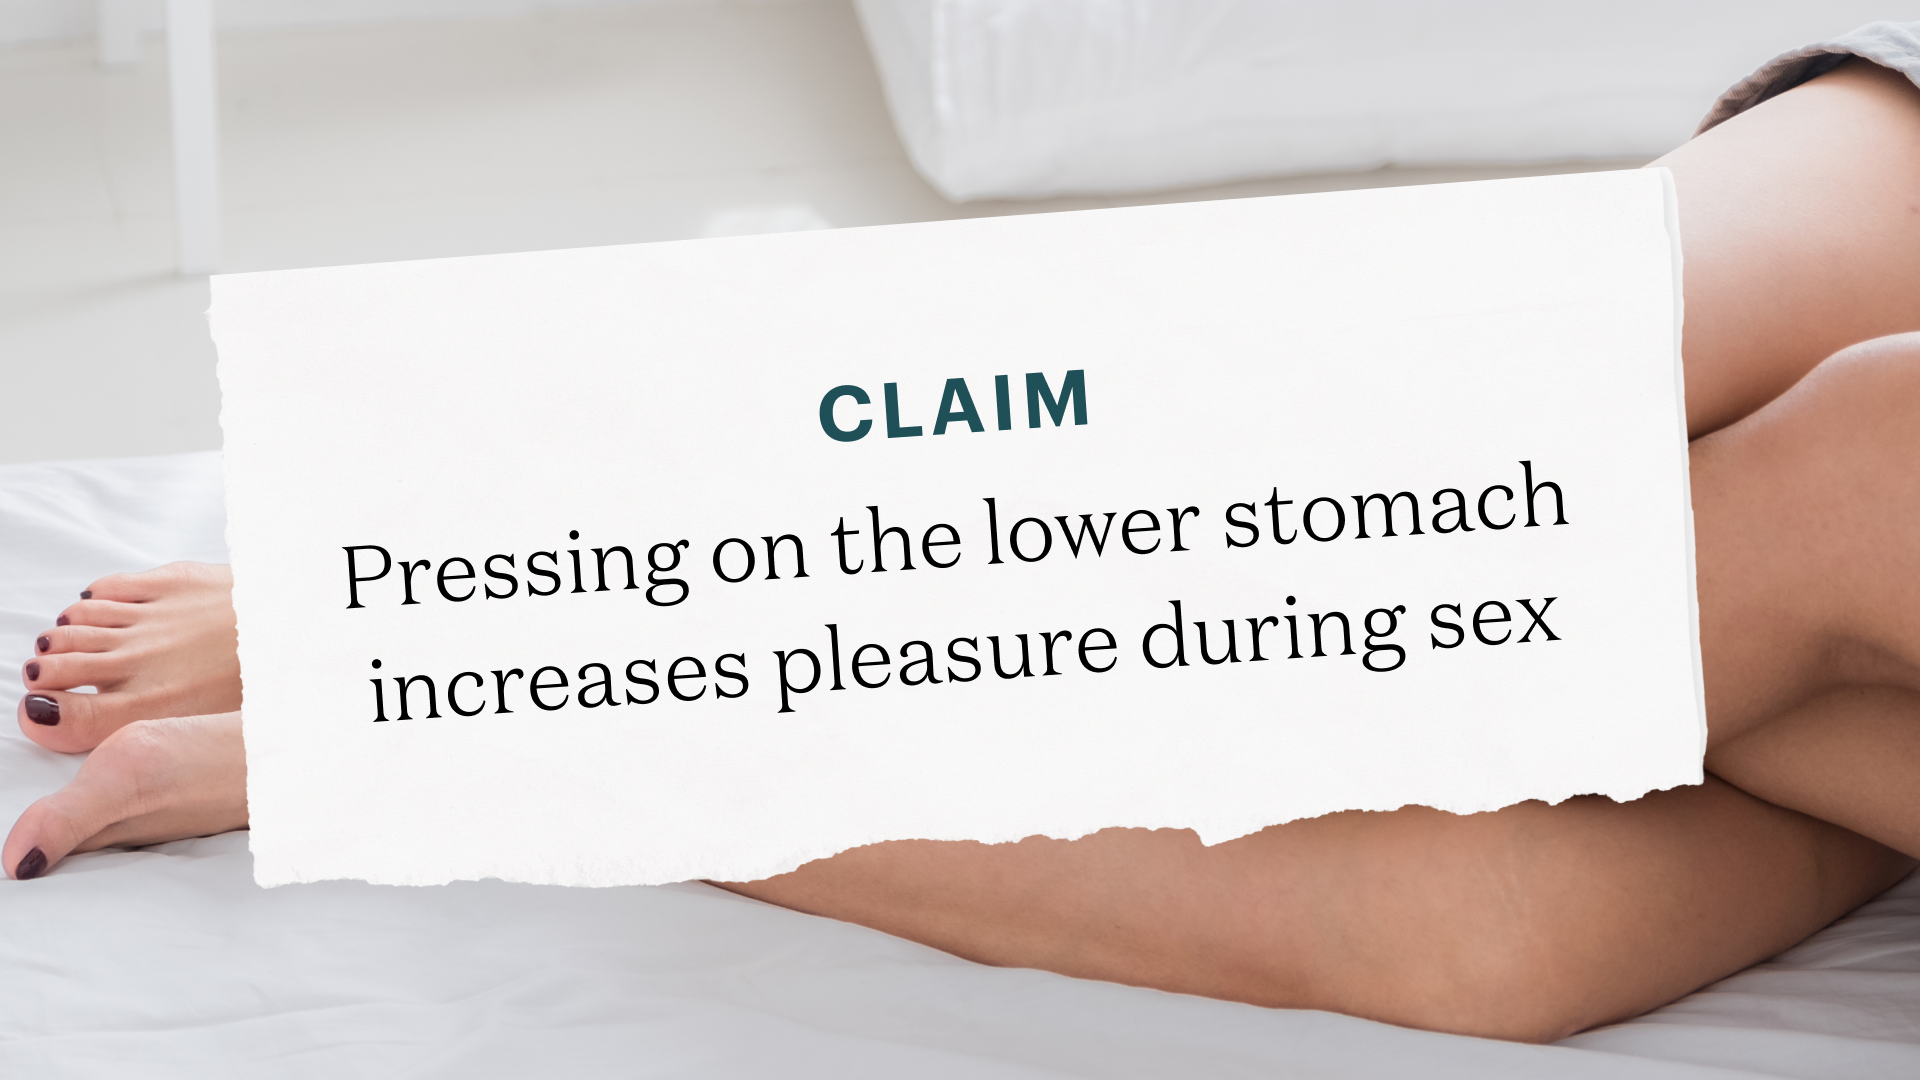 Image of legs with text box in front that reads "claim: pressing on the lower stomach increases pleasure during sex"